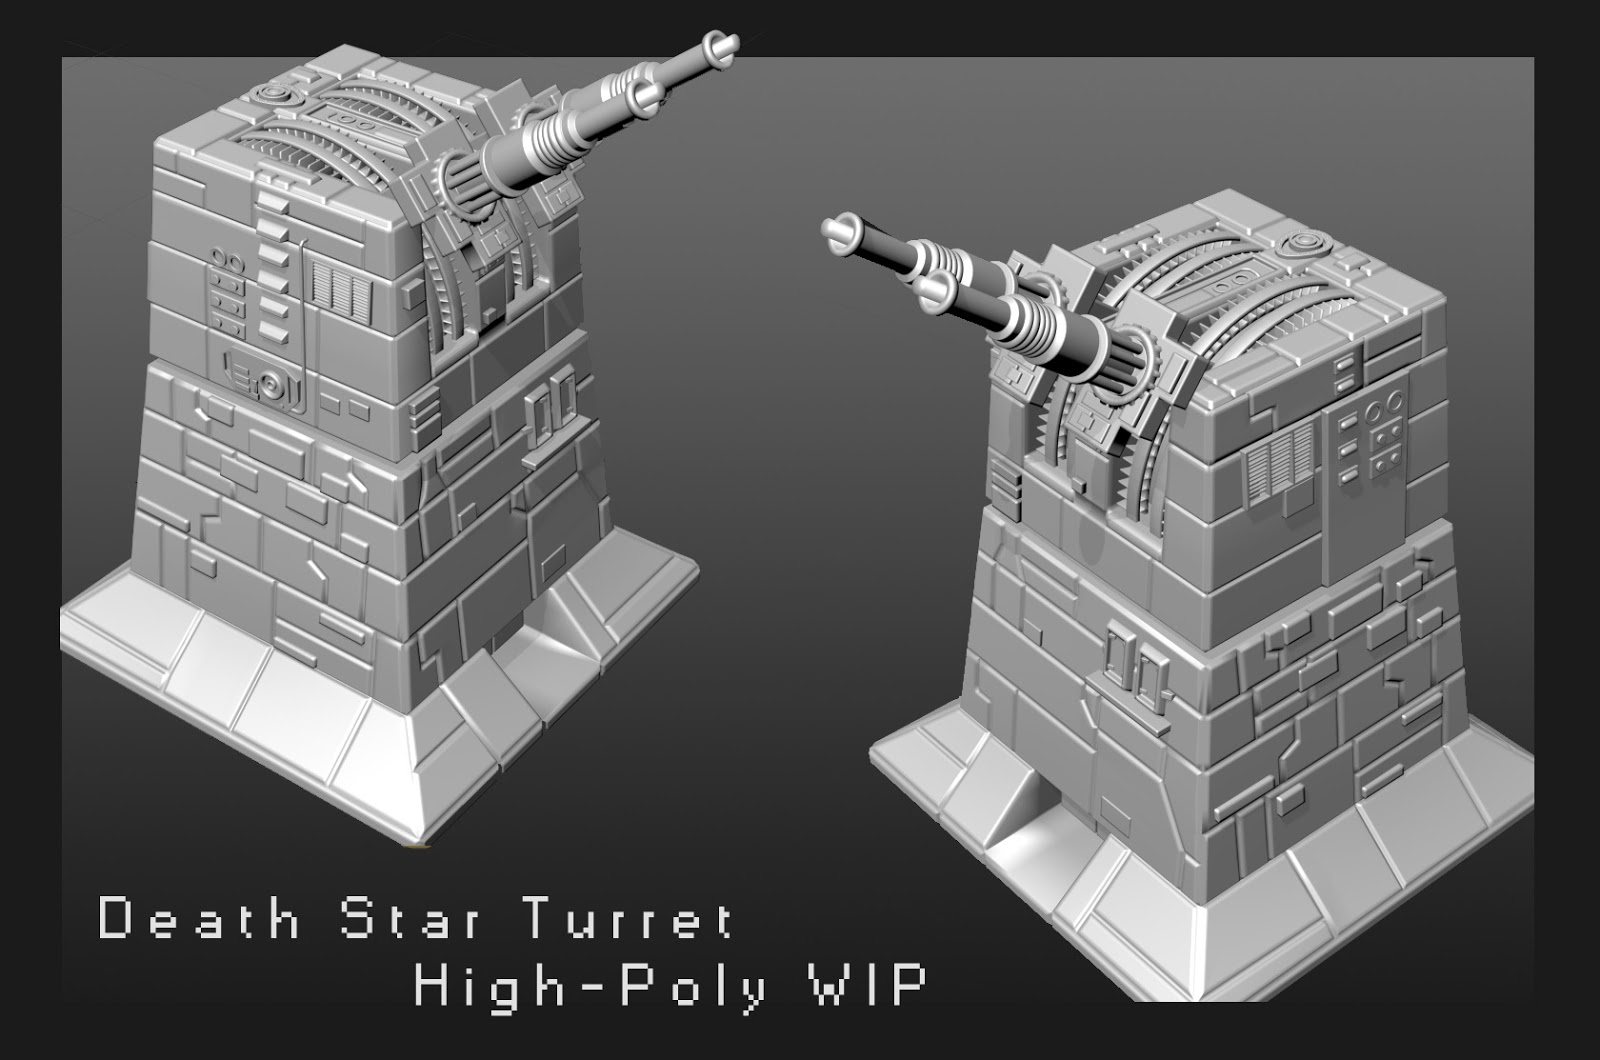 Deah_Star_Turret_High_Poly_WIP_A.jpg